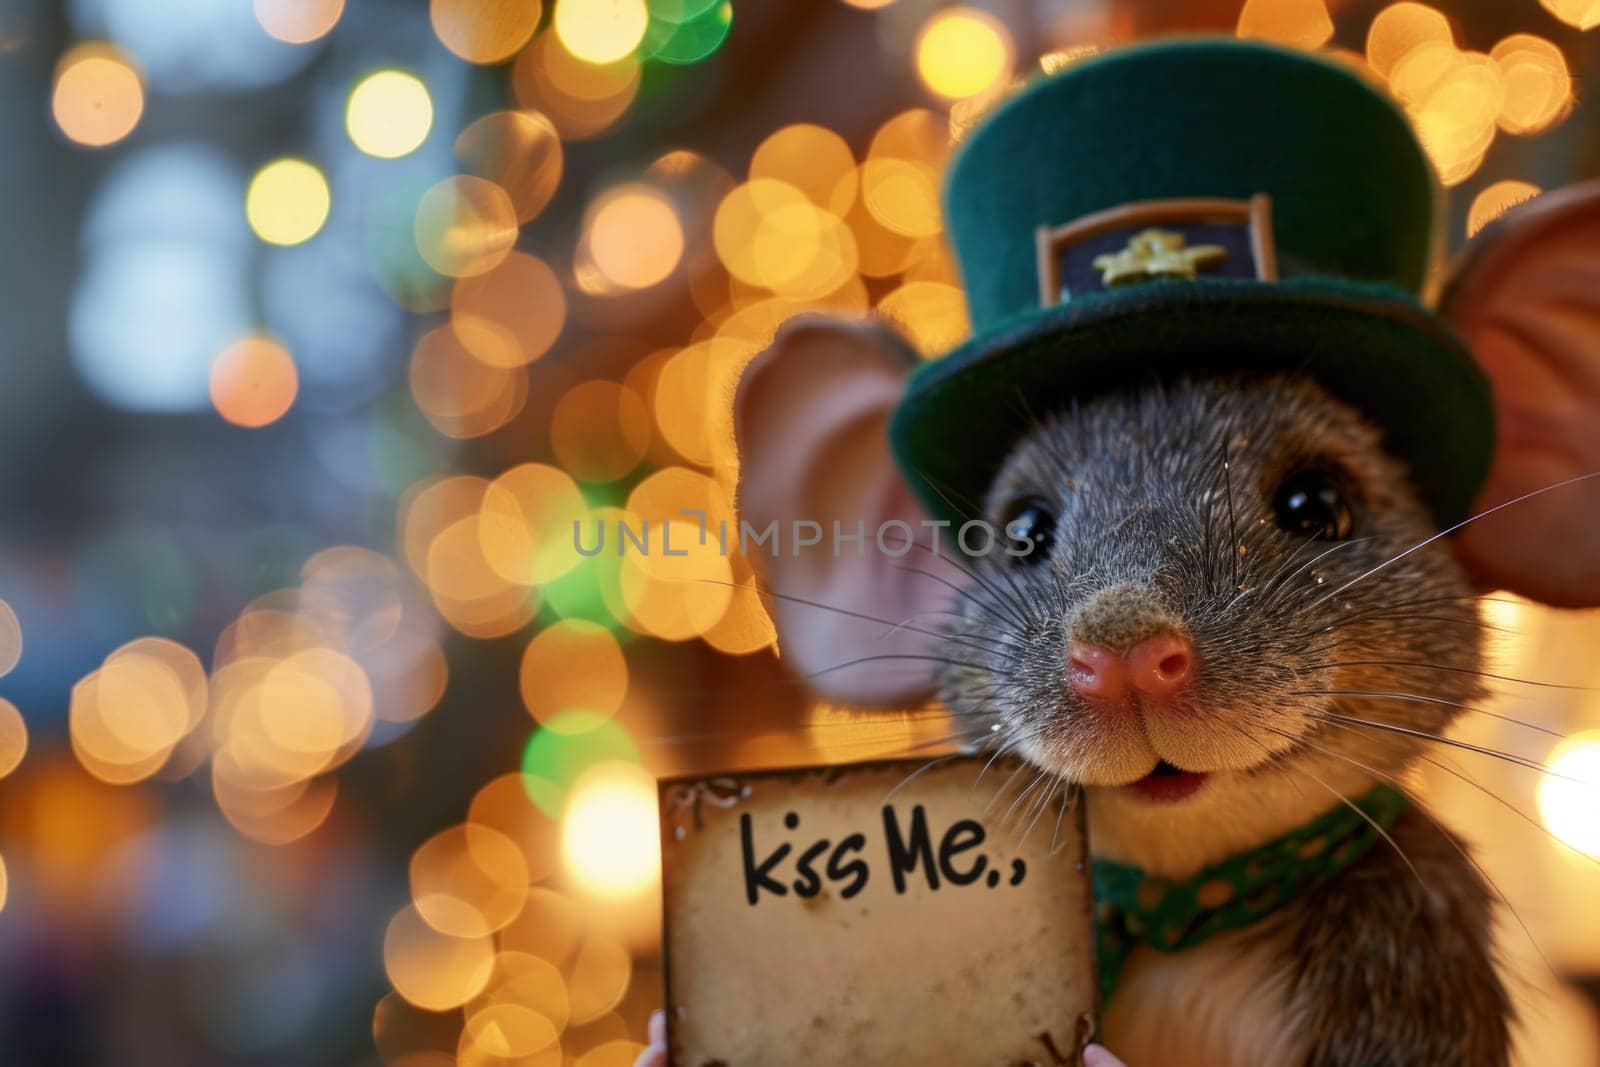 A mouse wearing a green hat and holding up the sign